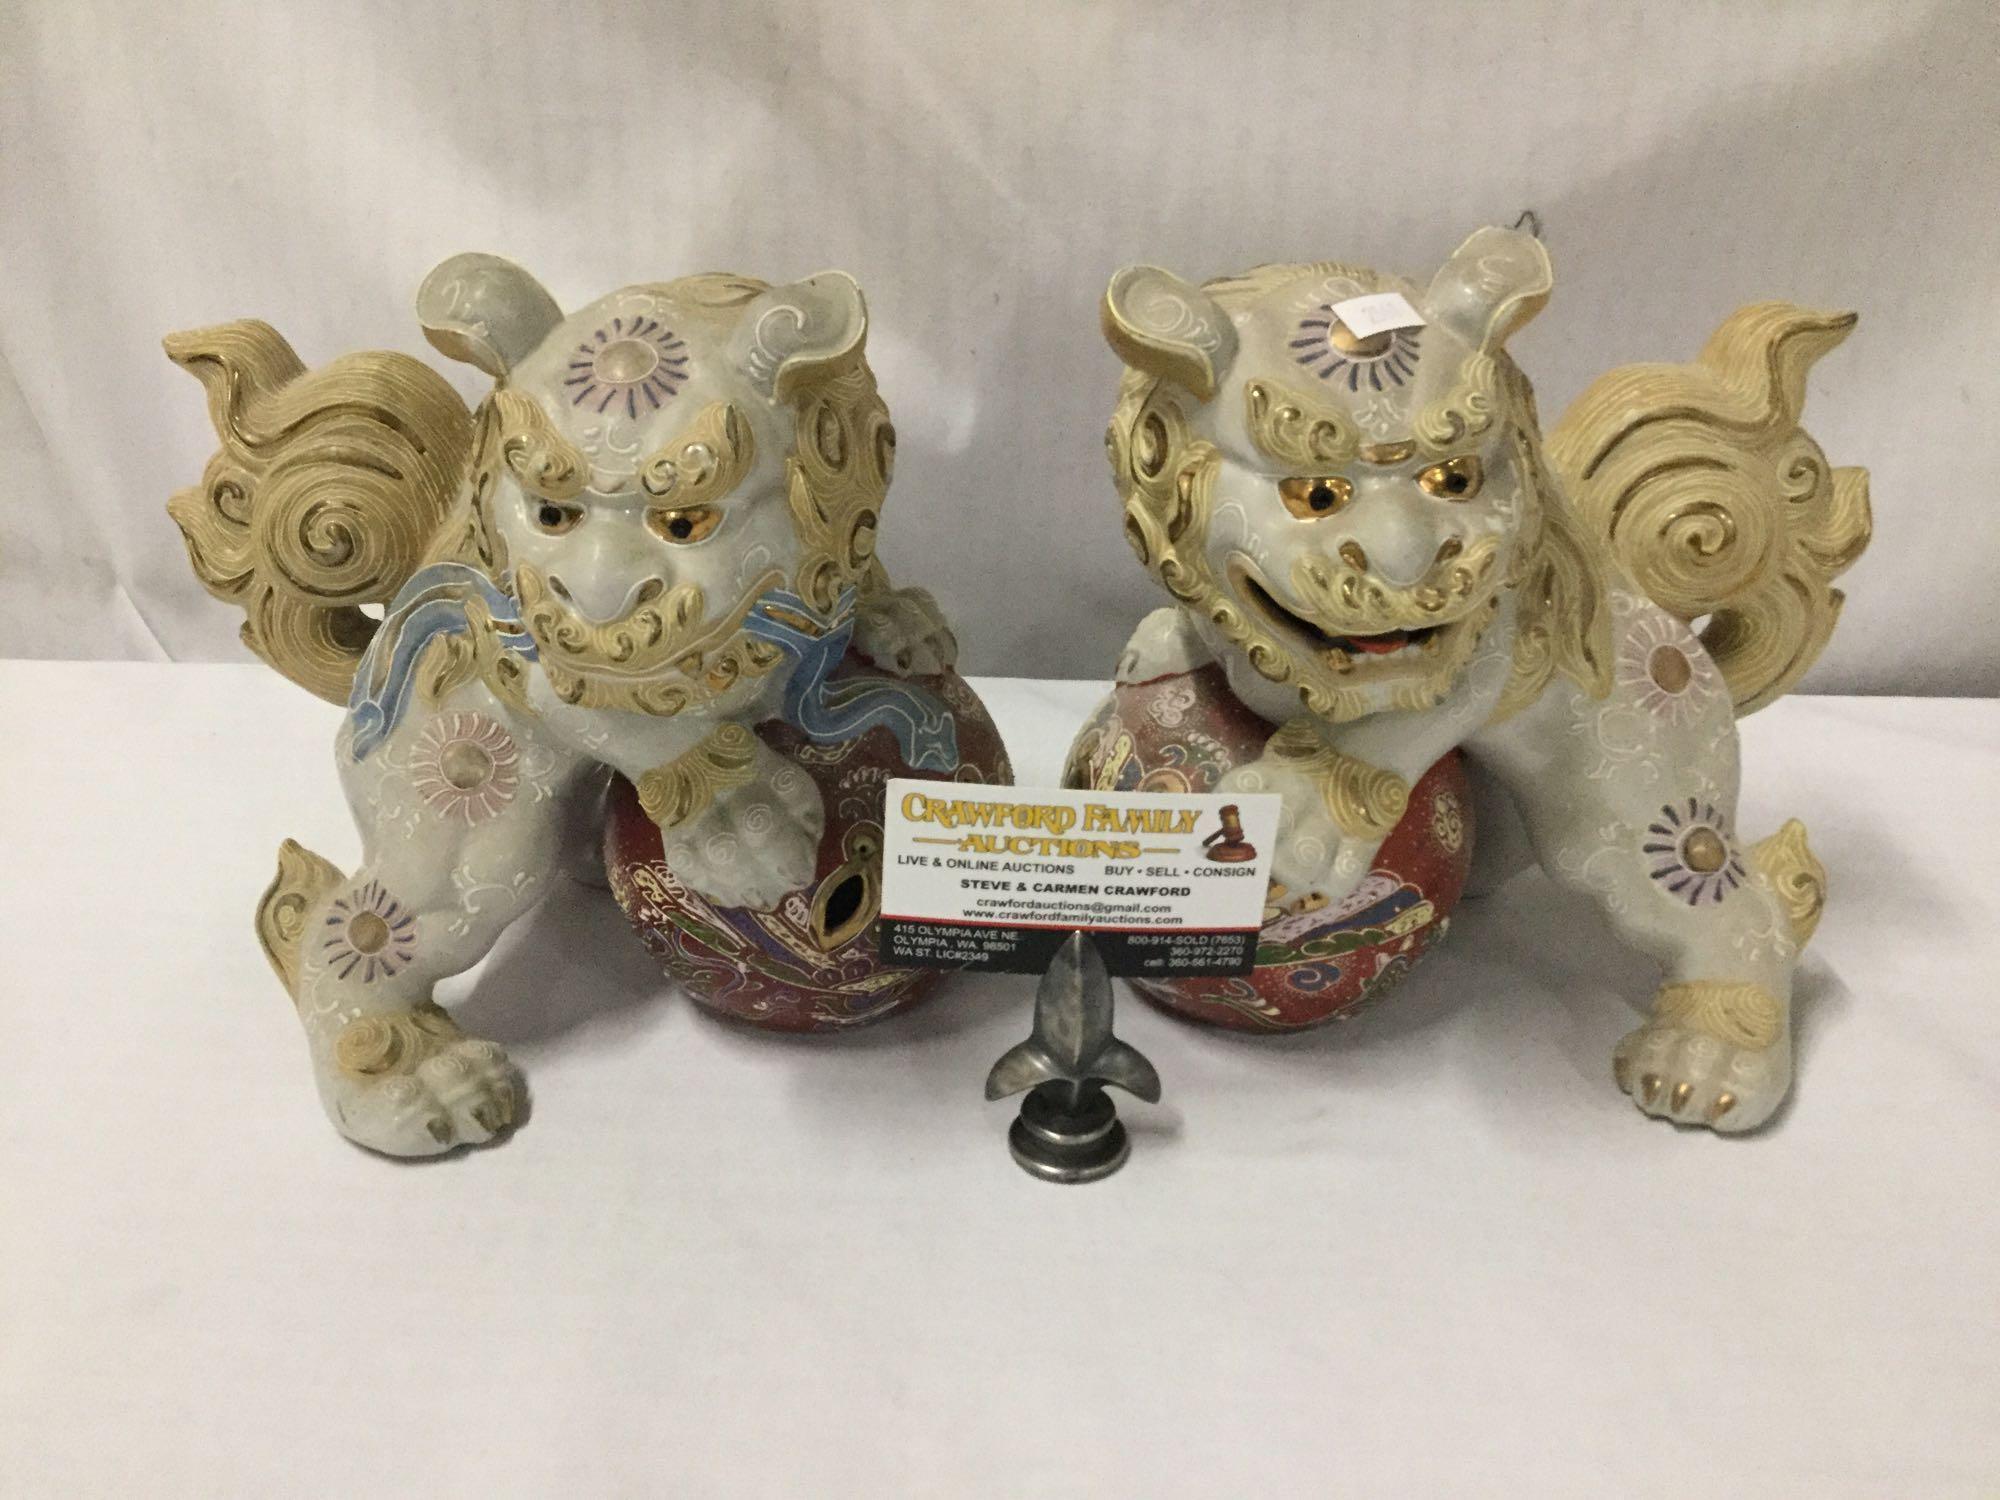 2 antique hand painted imari style Chinese porcelain Guardian Lion /foo dog statues.